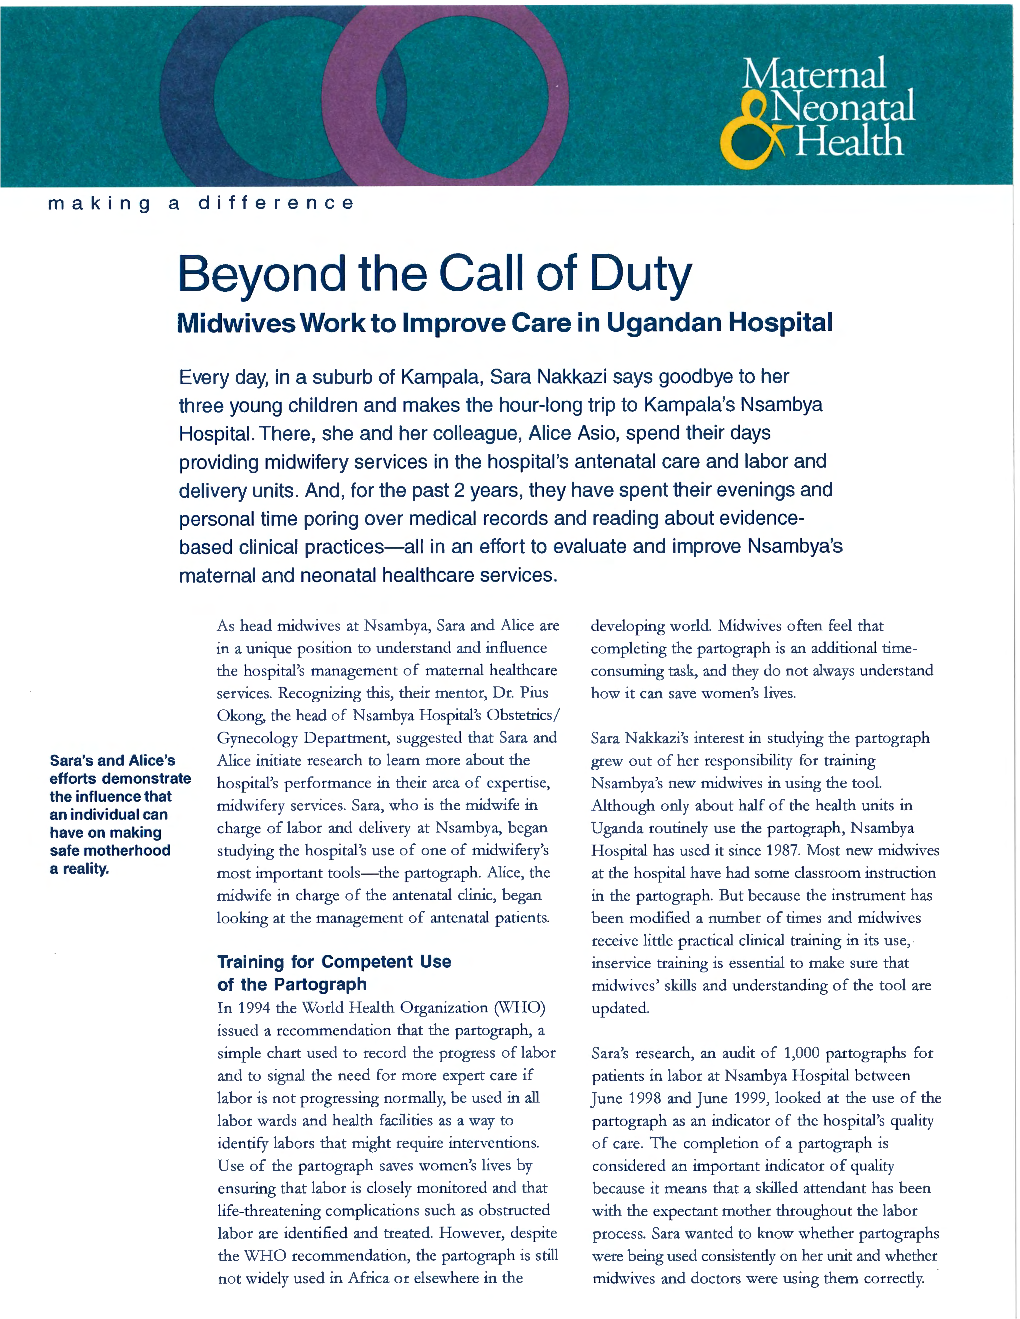 Beyond the Call of Duty Midwives Work to Improve Care in Ugandan Hospital